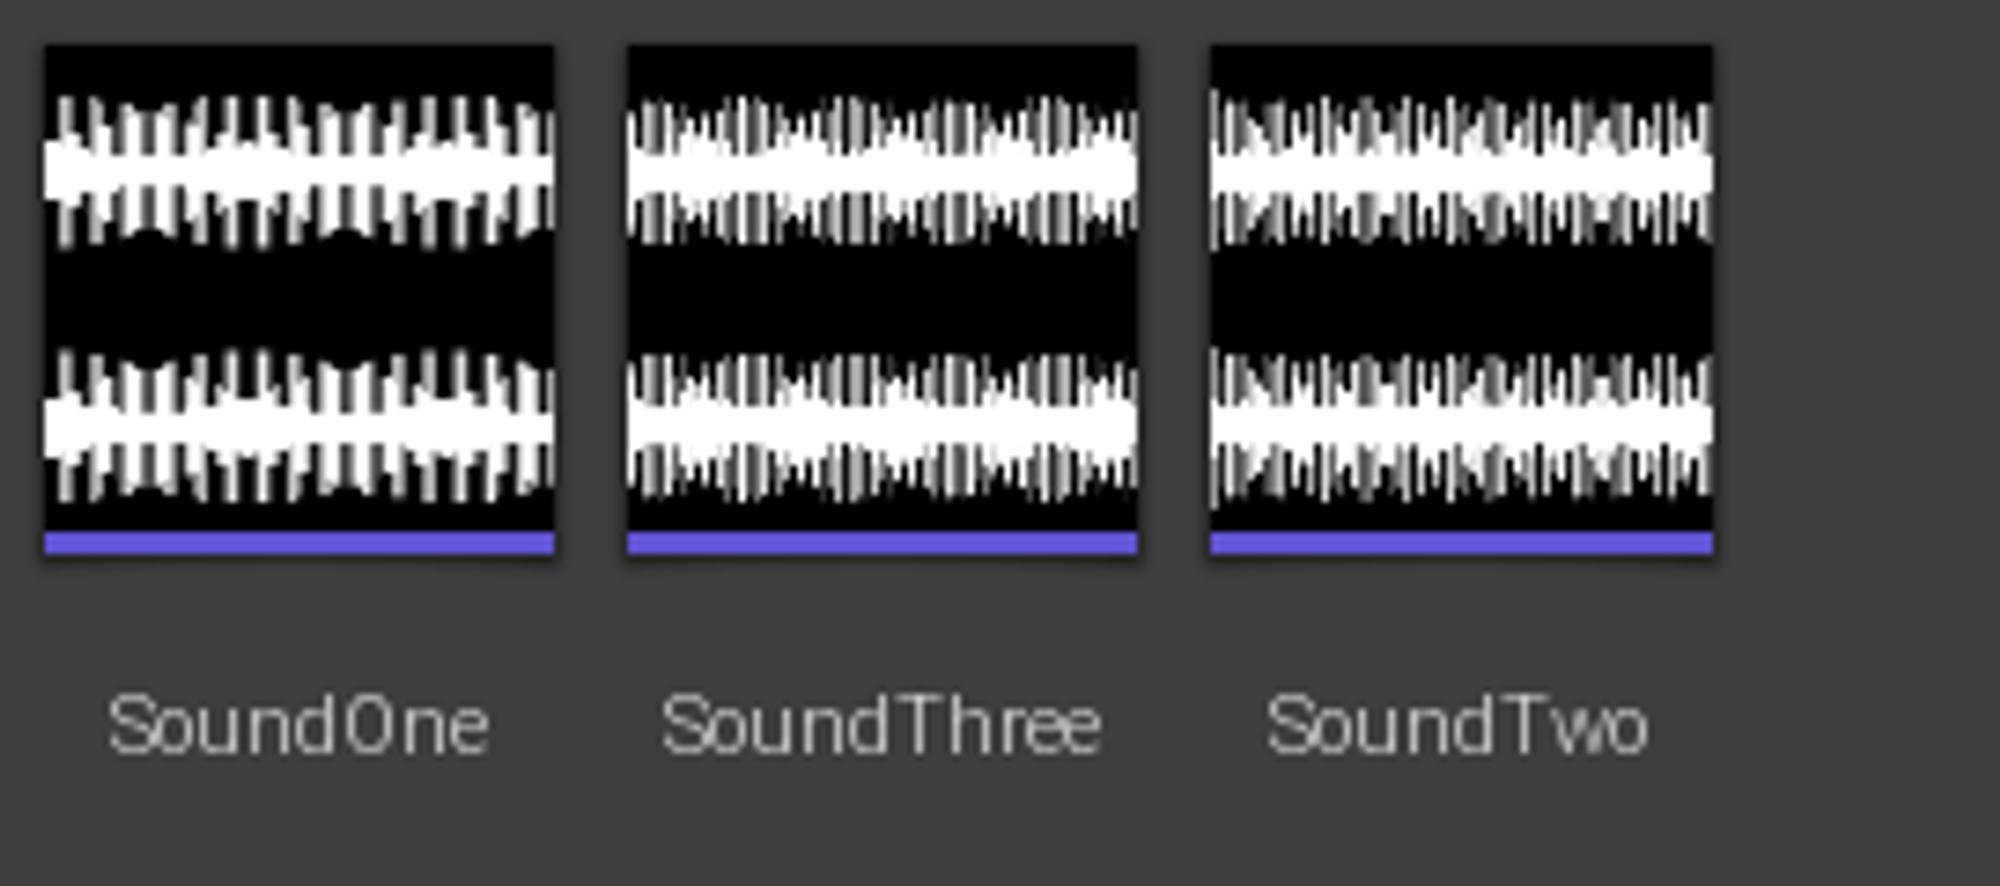 Audio clips imported into Unreal